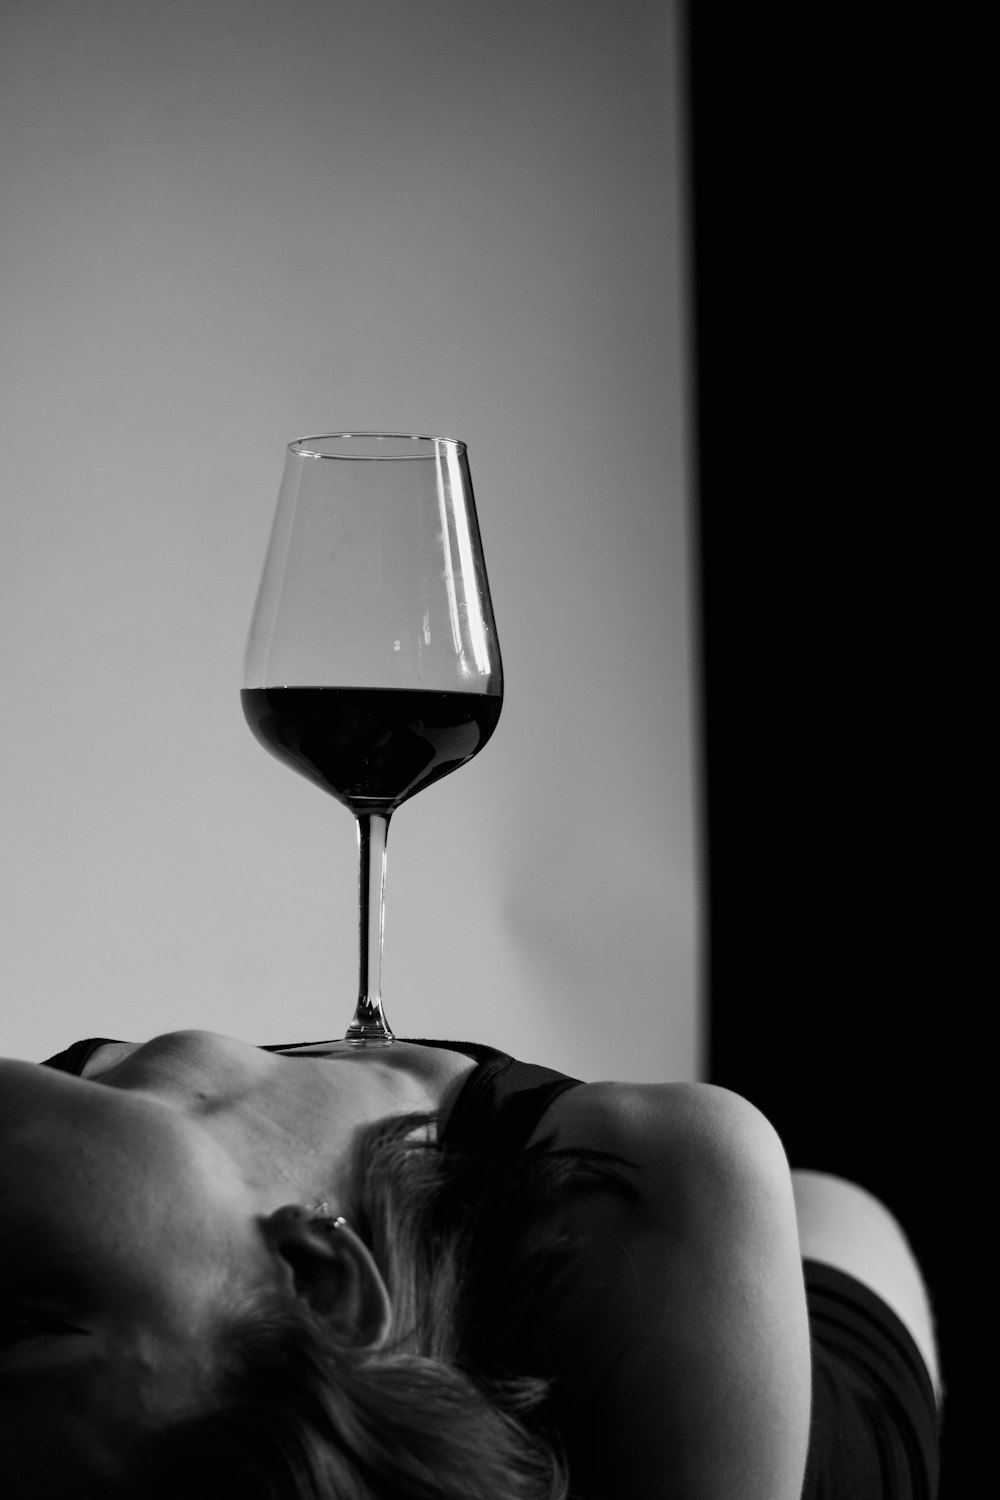 a woman sleeping next to a wine glass